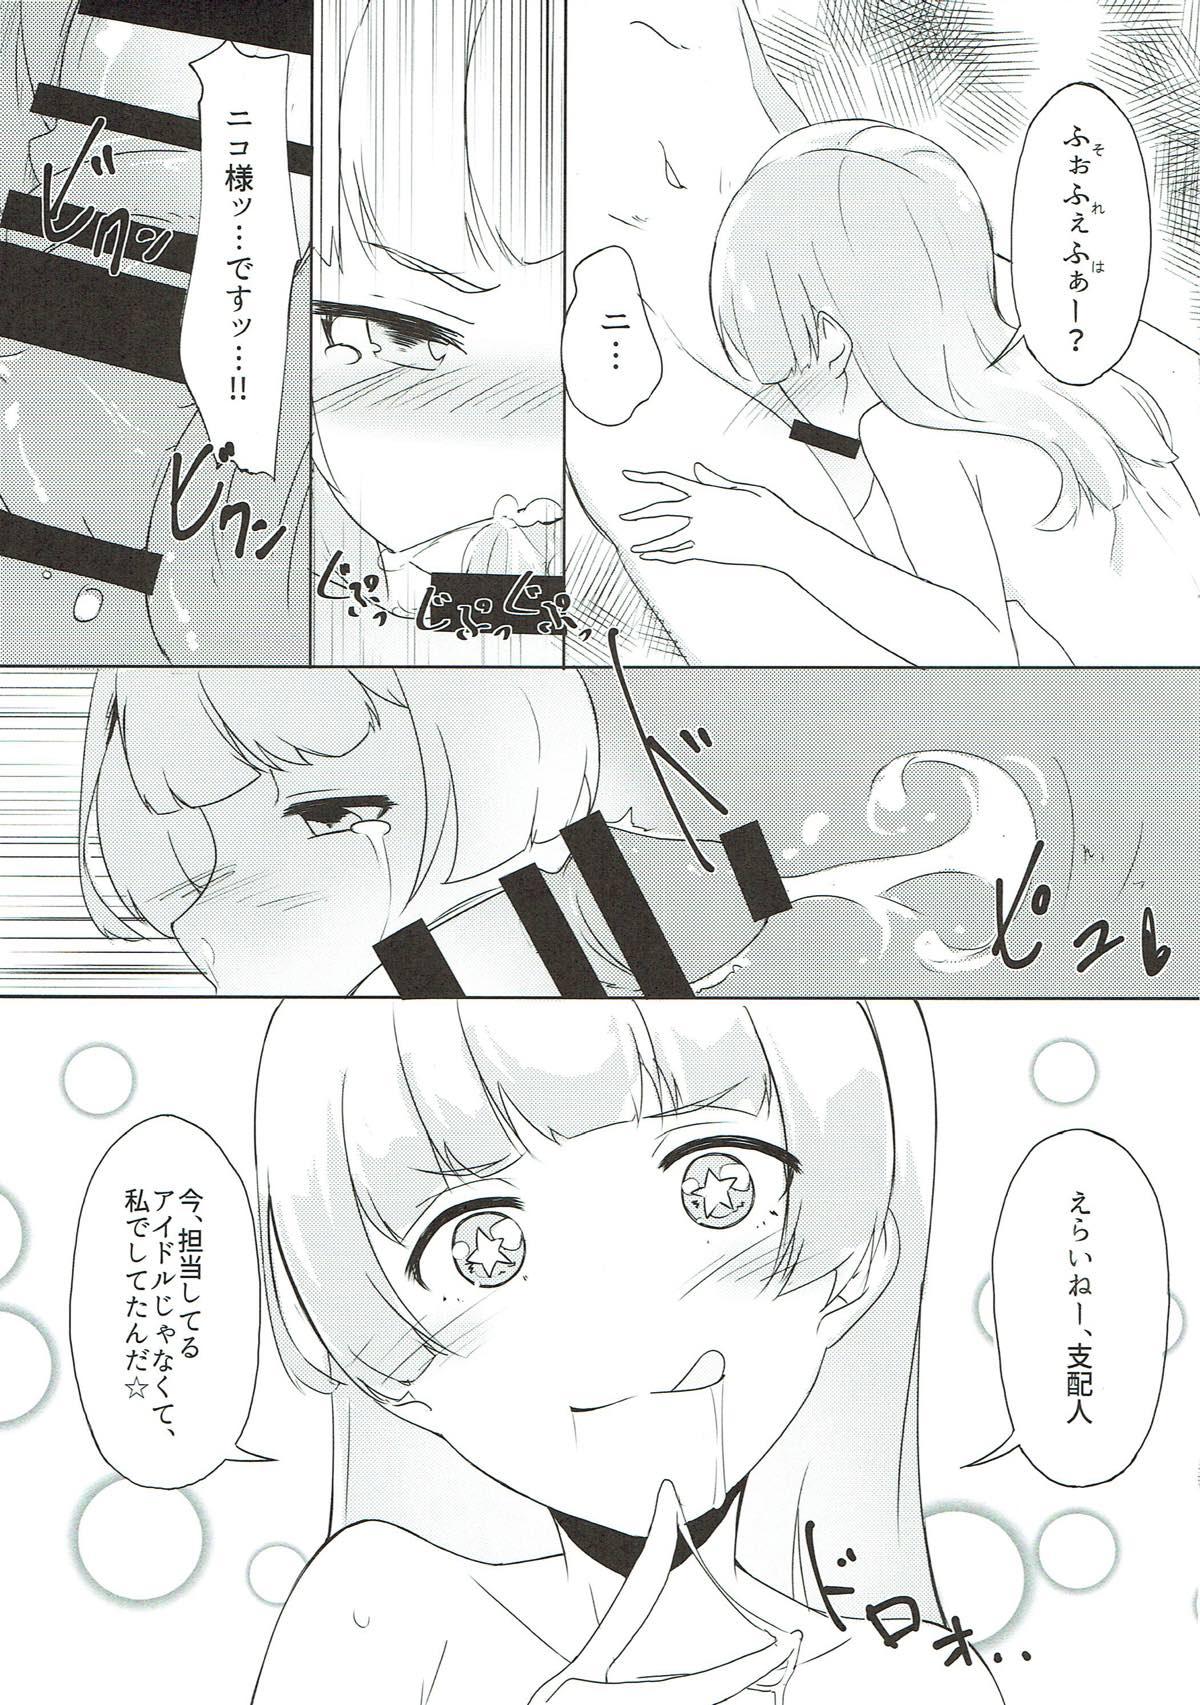 Sextape Terrorist Comes Home - Tokyo 7th sisters Tites - Page 6